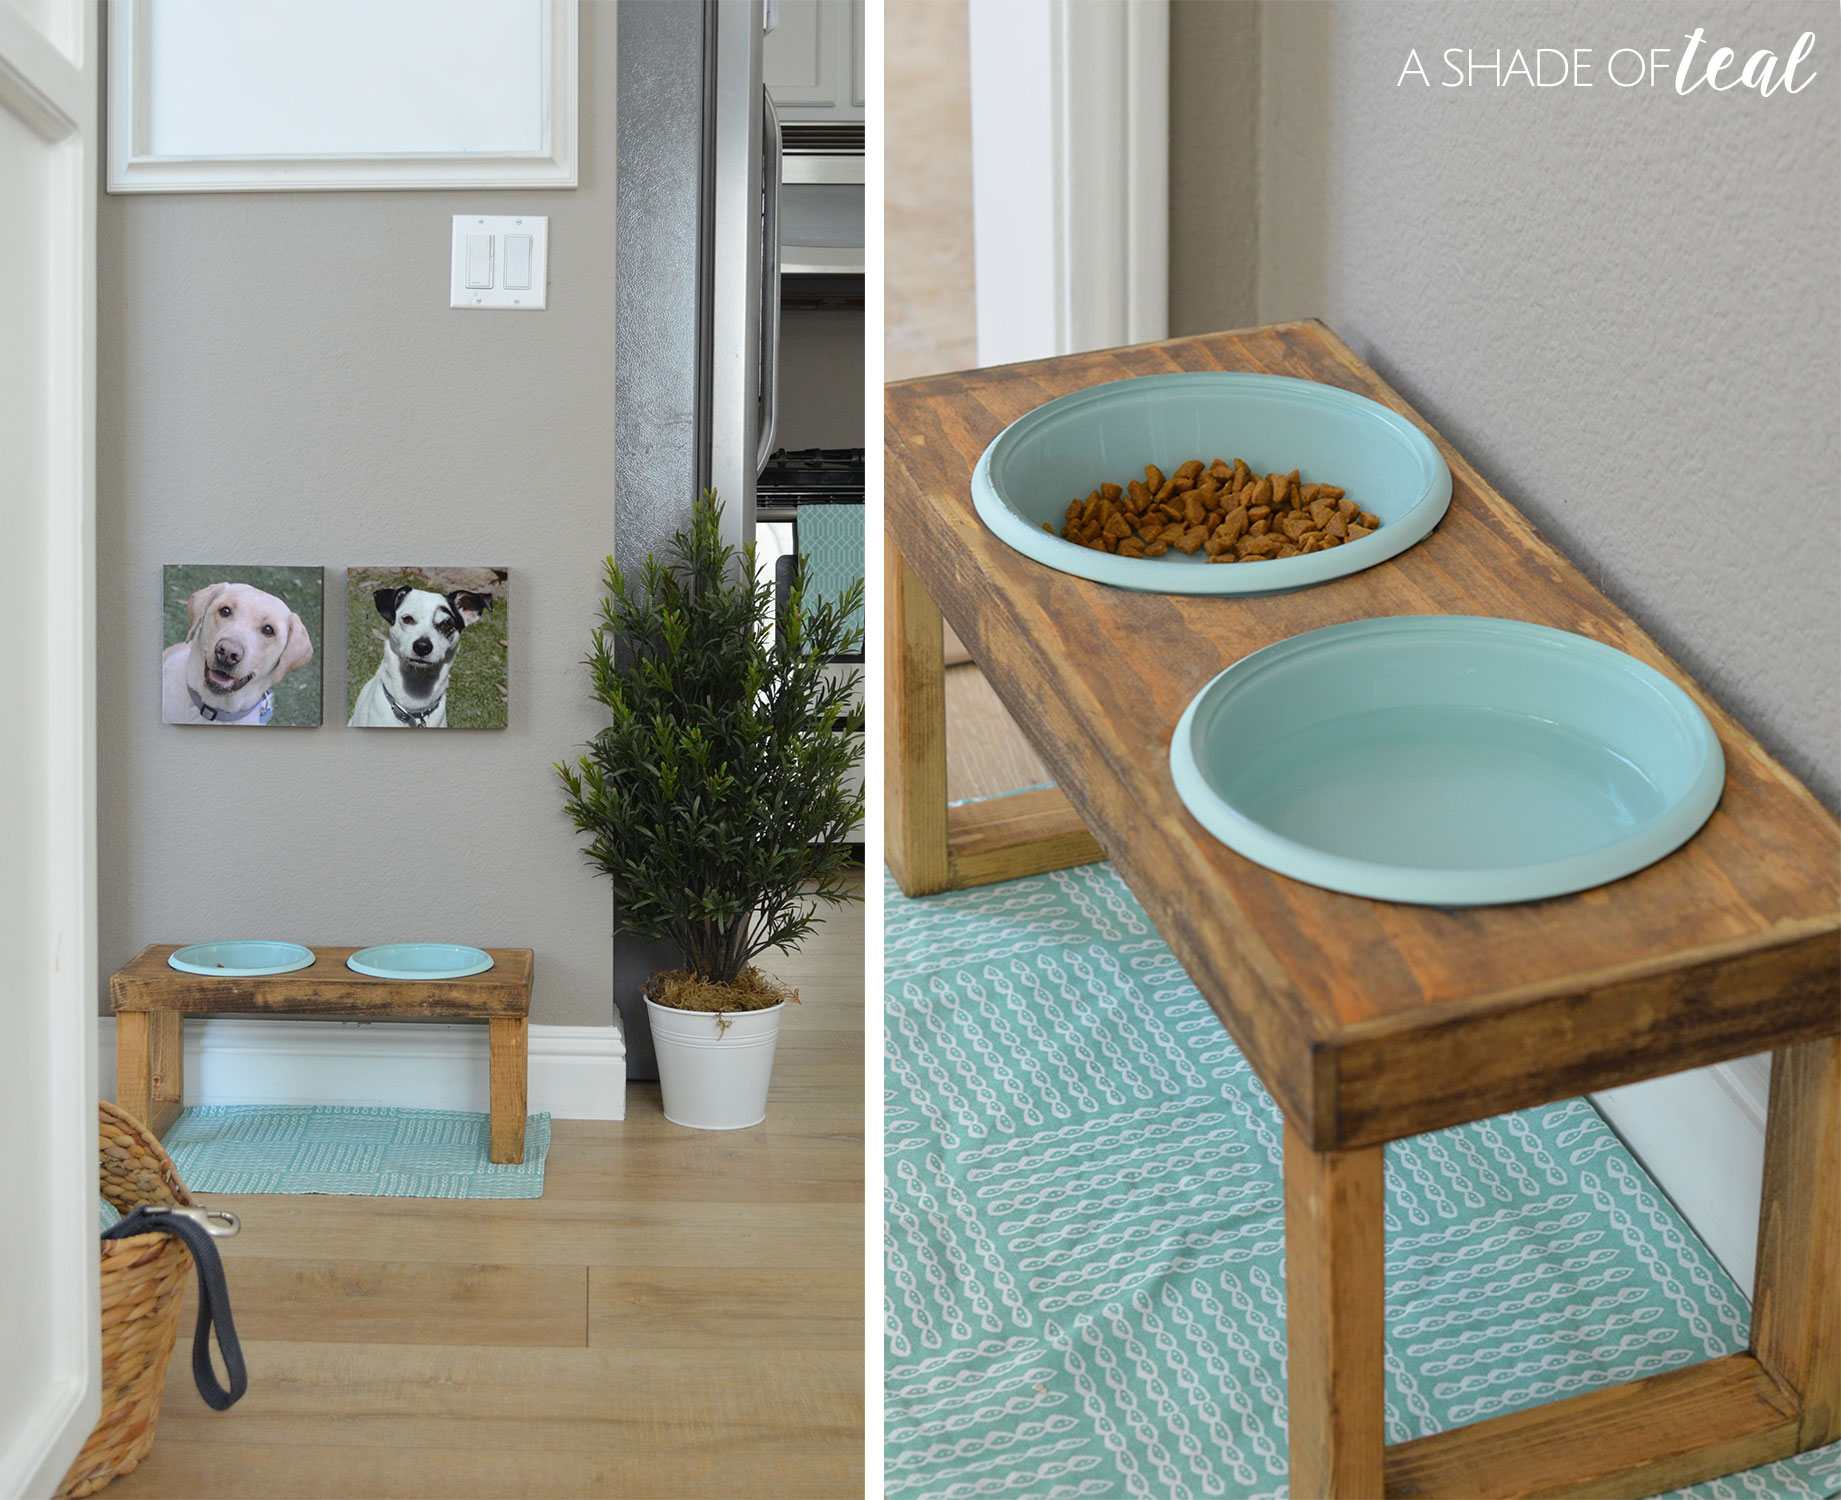 Raised Dog Food Bowls : 7 Steps (with Pictures) - Instructables